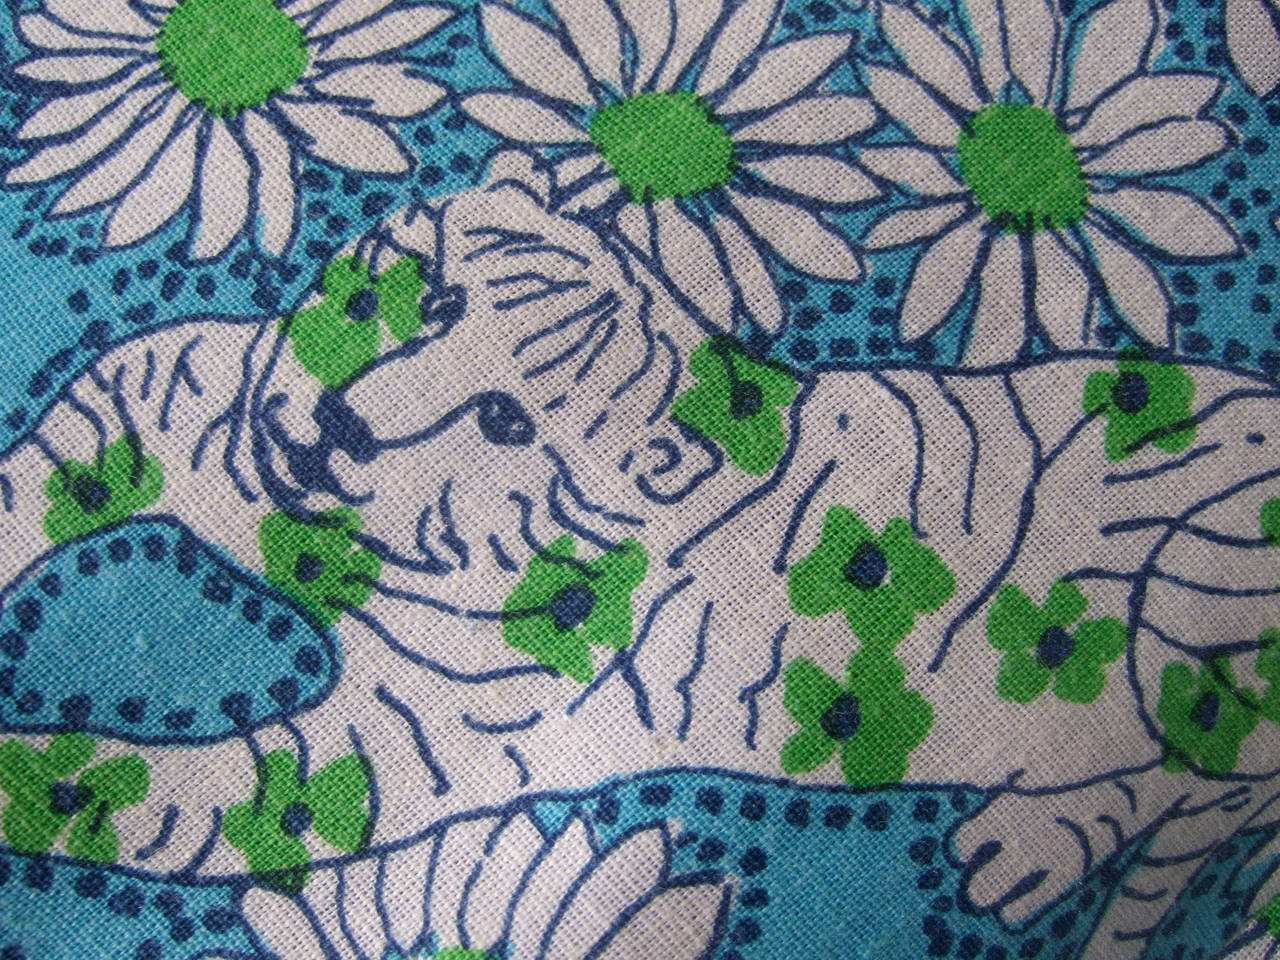 Lilly Pulitzer Men's Whimsical Jungle Print Jacket c 1970s Size 41 3